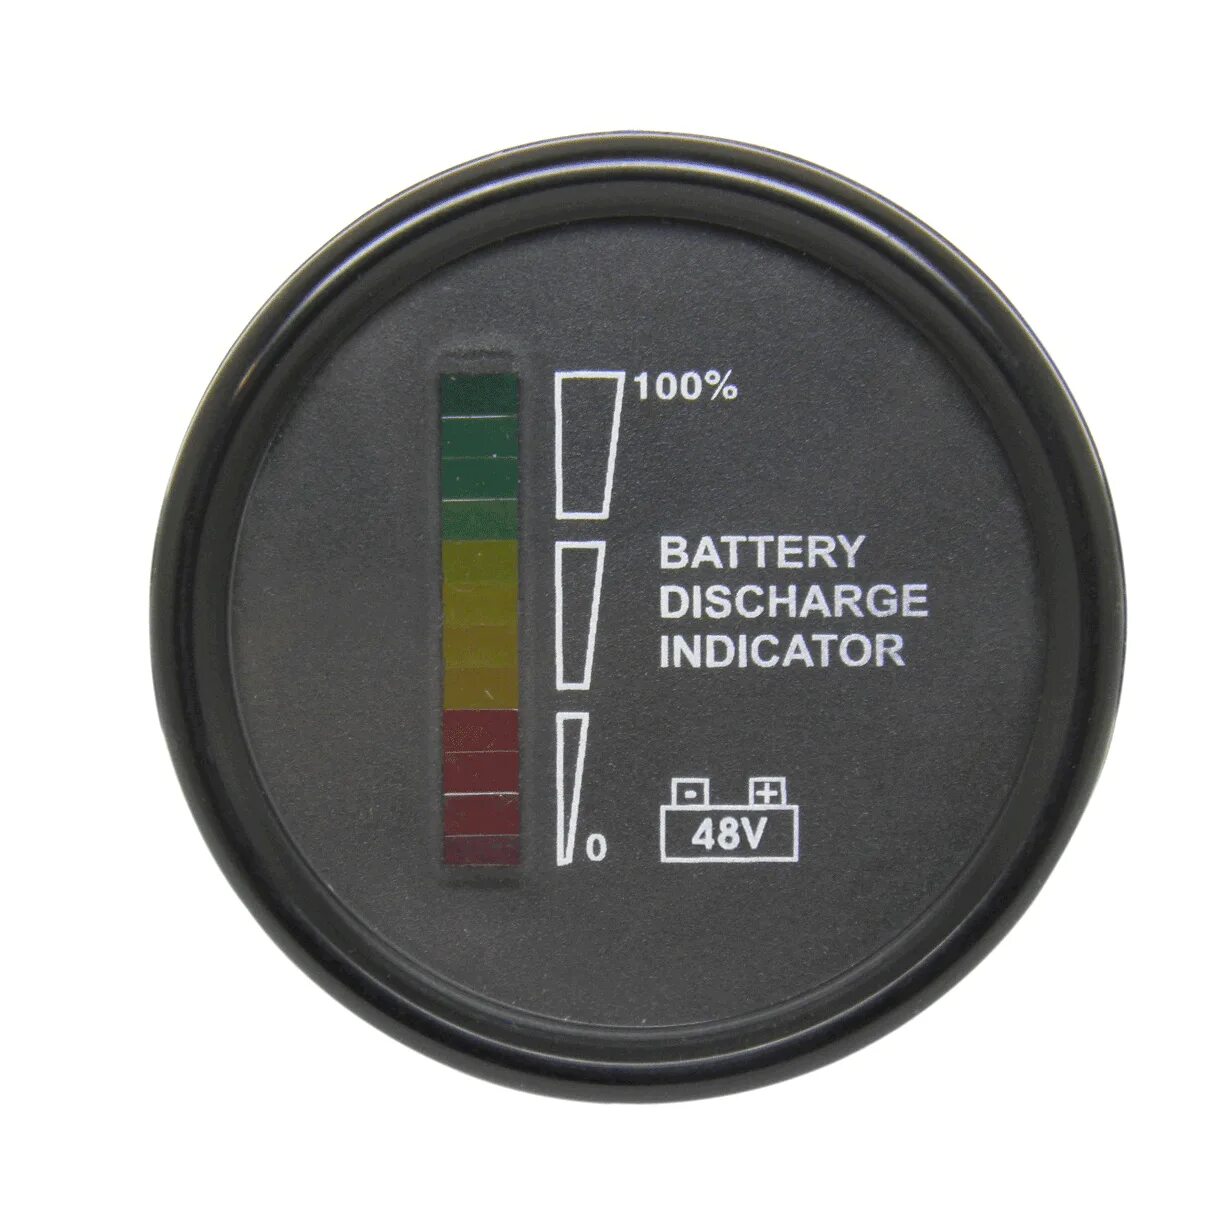 Battery discharged. Battery discharge indicator BDI-40vm. Battery discharge indicator ej03i01. Discharging indicator. КАНГИ индикатор бирдж.